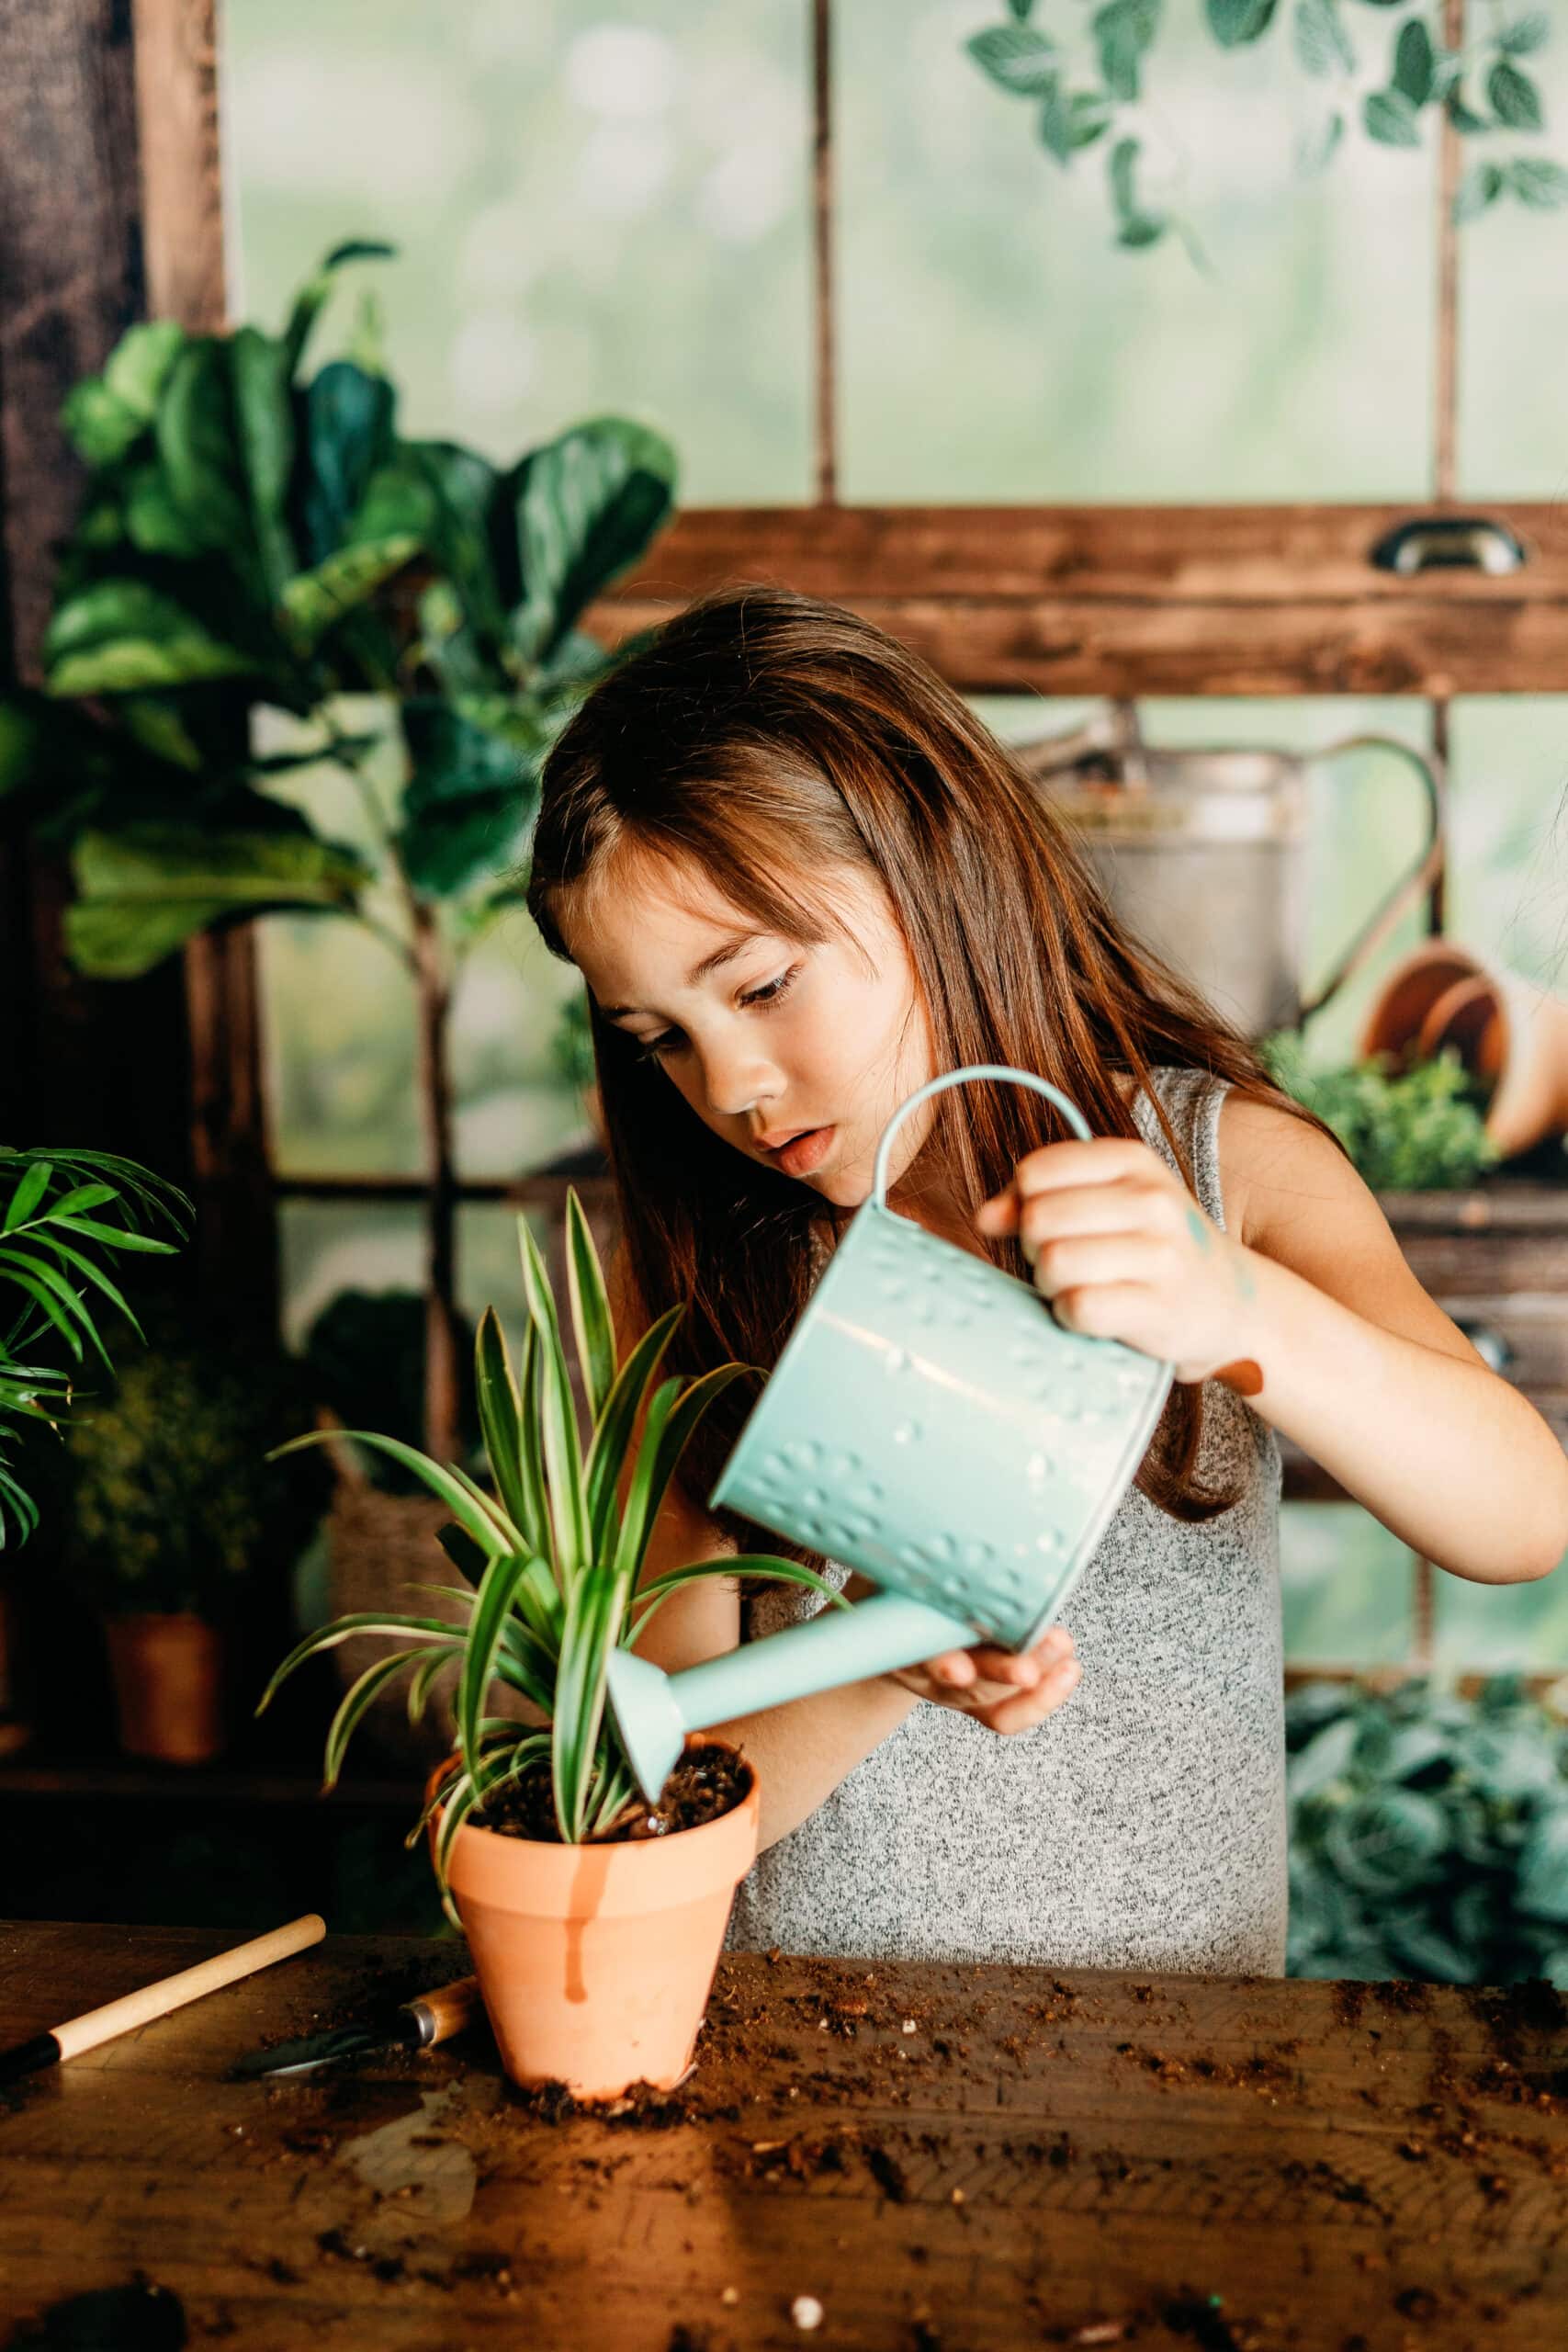 Spring Mini Sessions: A young girl waters a house plant